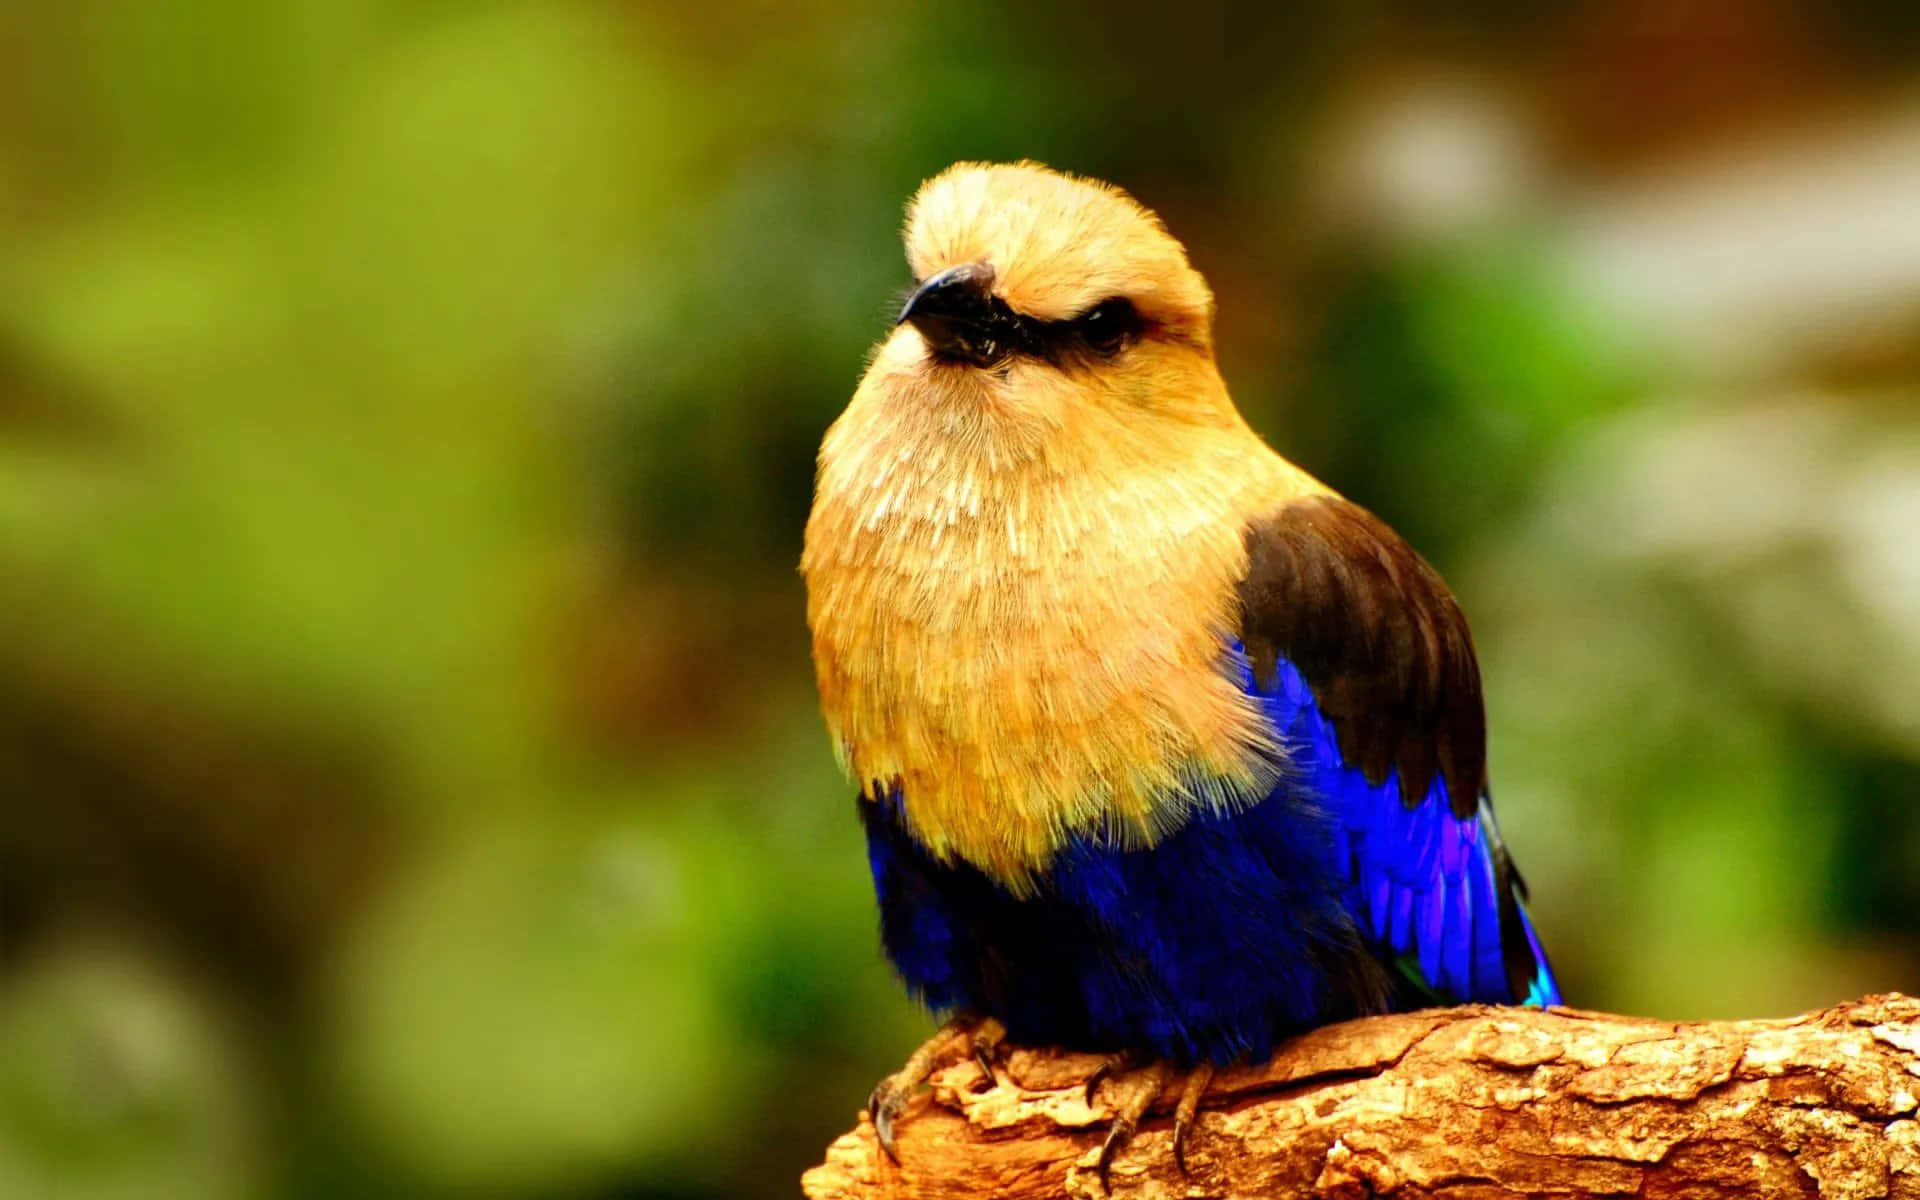 A beautiful bird perched upon a branch, taking in the scenery